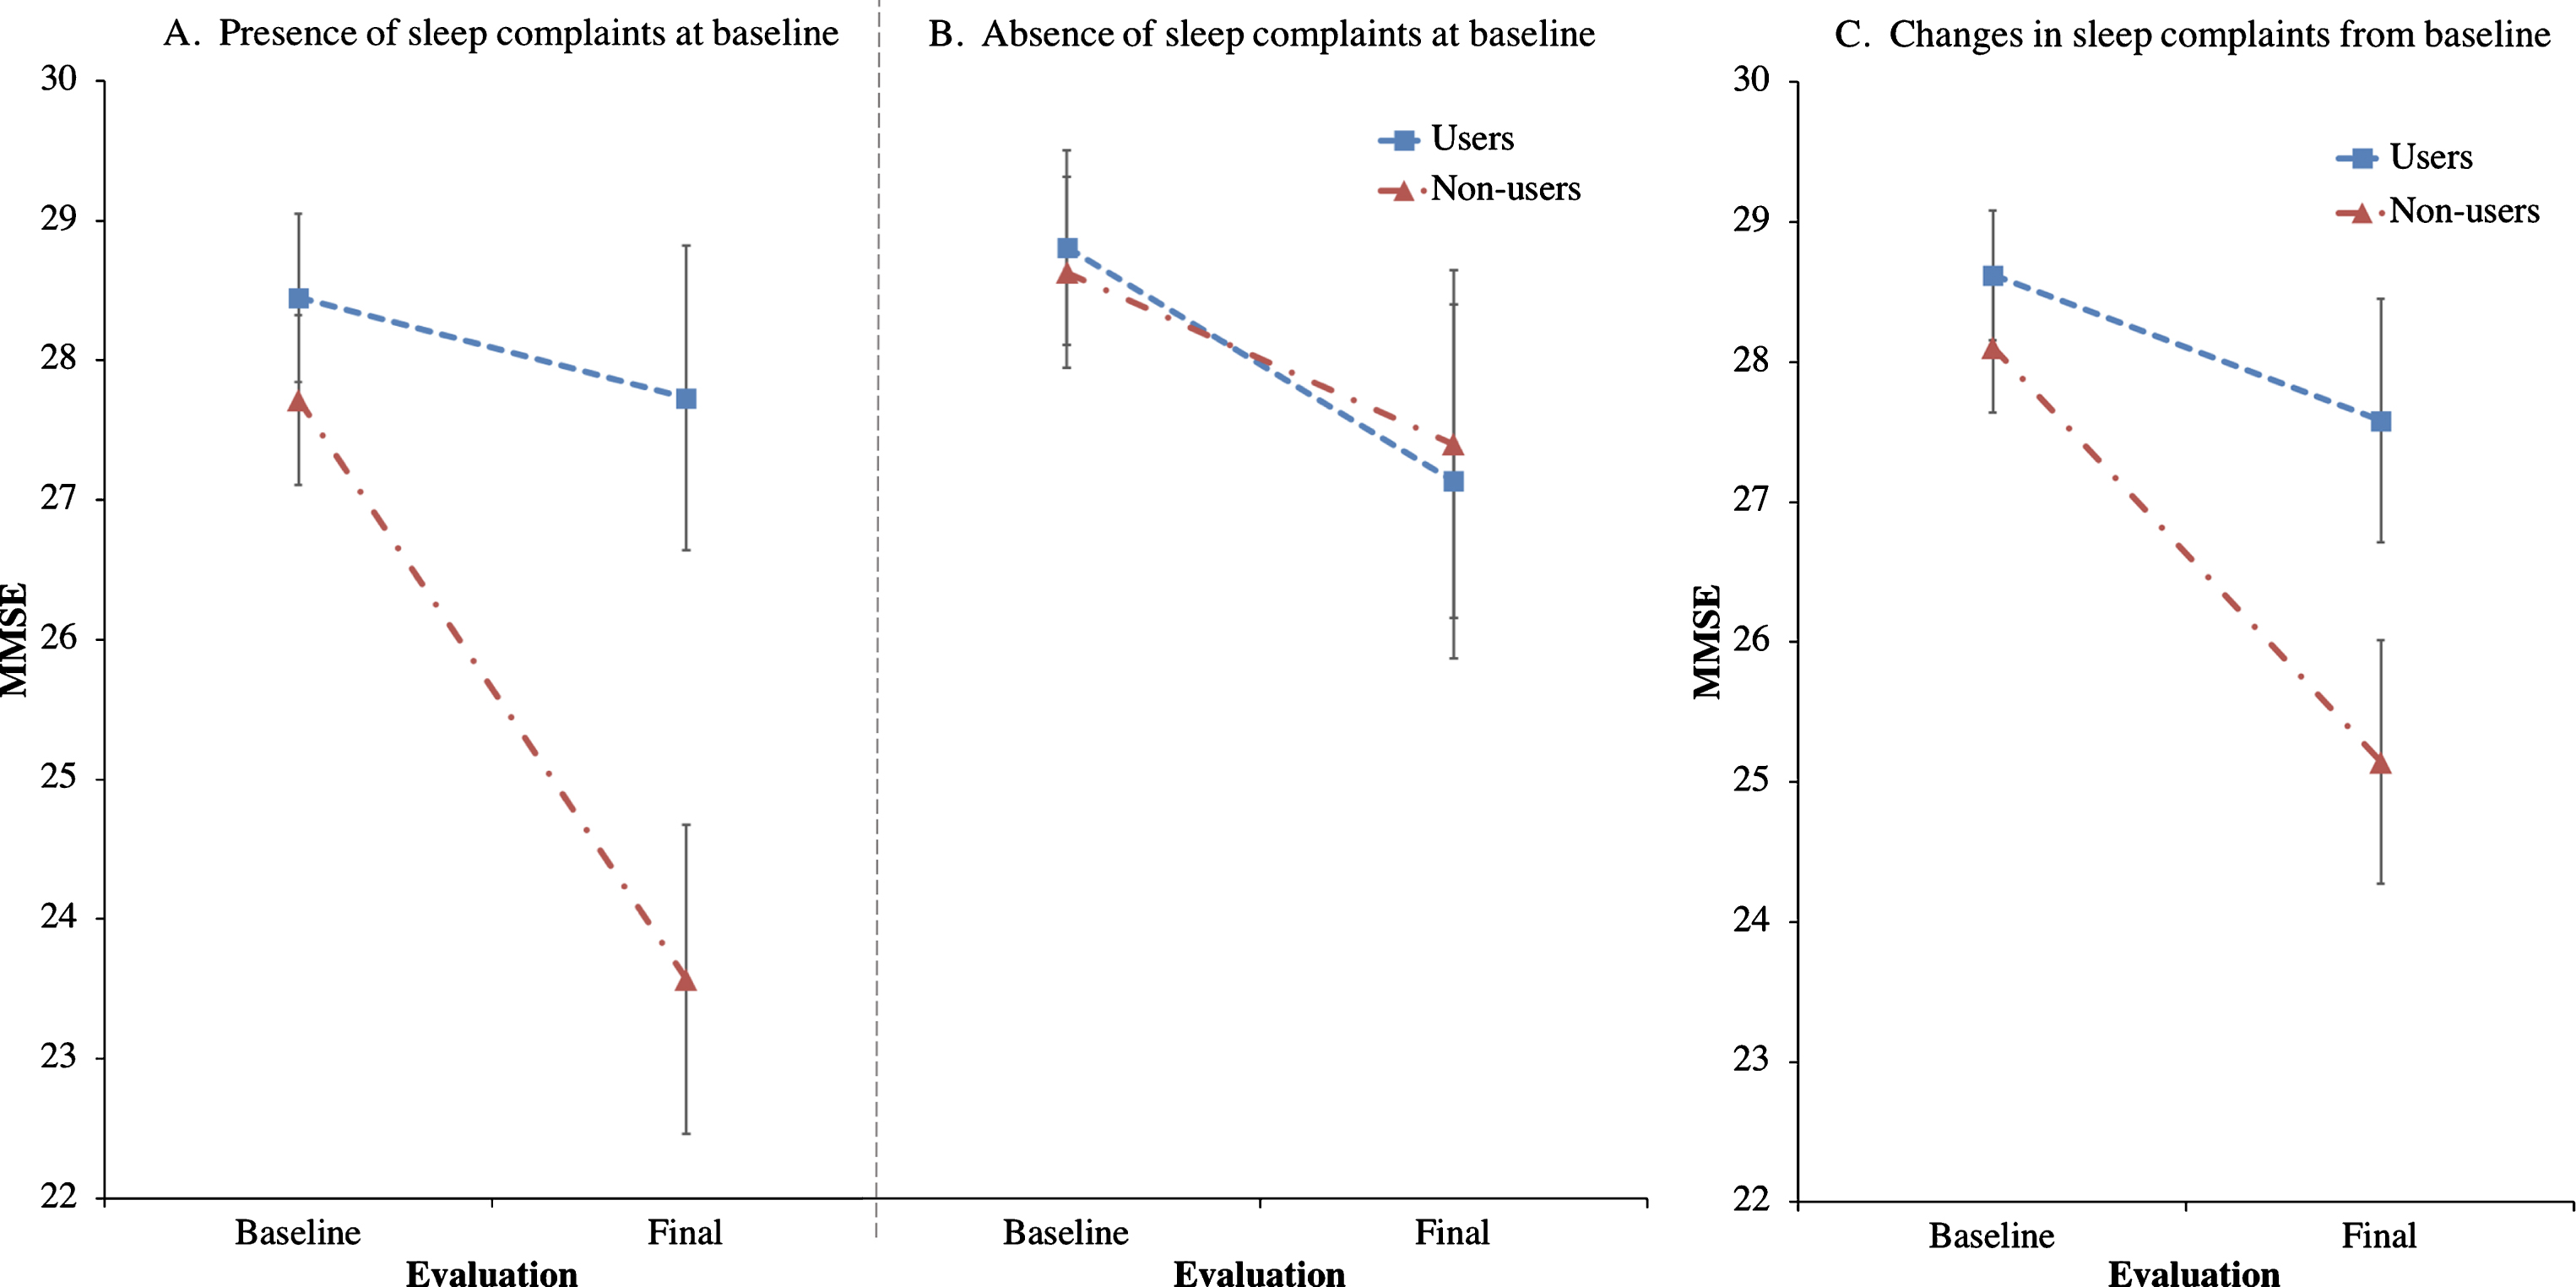 Effects of trazodone use on MMSE are dependent on sleep symptom severity at baseline and on their longitudinal improvement. Post-hoc analyses of trazodone effects on longitudinal MMSE performance in 25 trazodone users and 25 trazodone non-users when accounting for (A) presence or (B) absence of sleep complaints at baseline evaluation, and (C) changes (improvement, worsening or stability) in sleep complaints between baseline and final evaluations. MMSE inter-evaluation interval was 4.12 years. Error bars indicate standard error of the mean. See text for details.